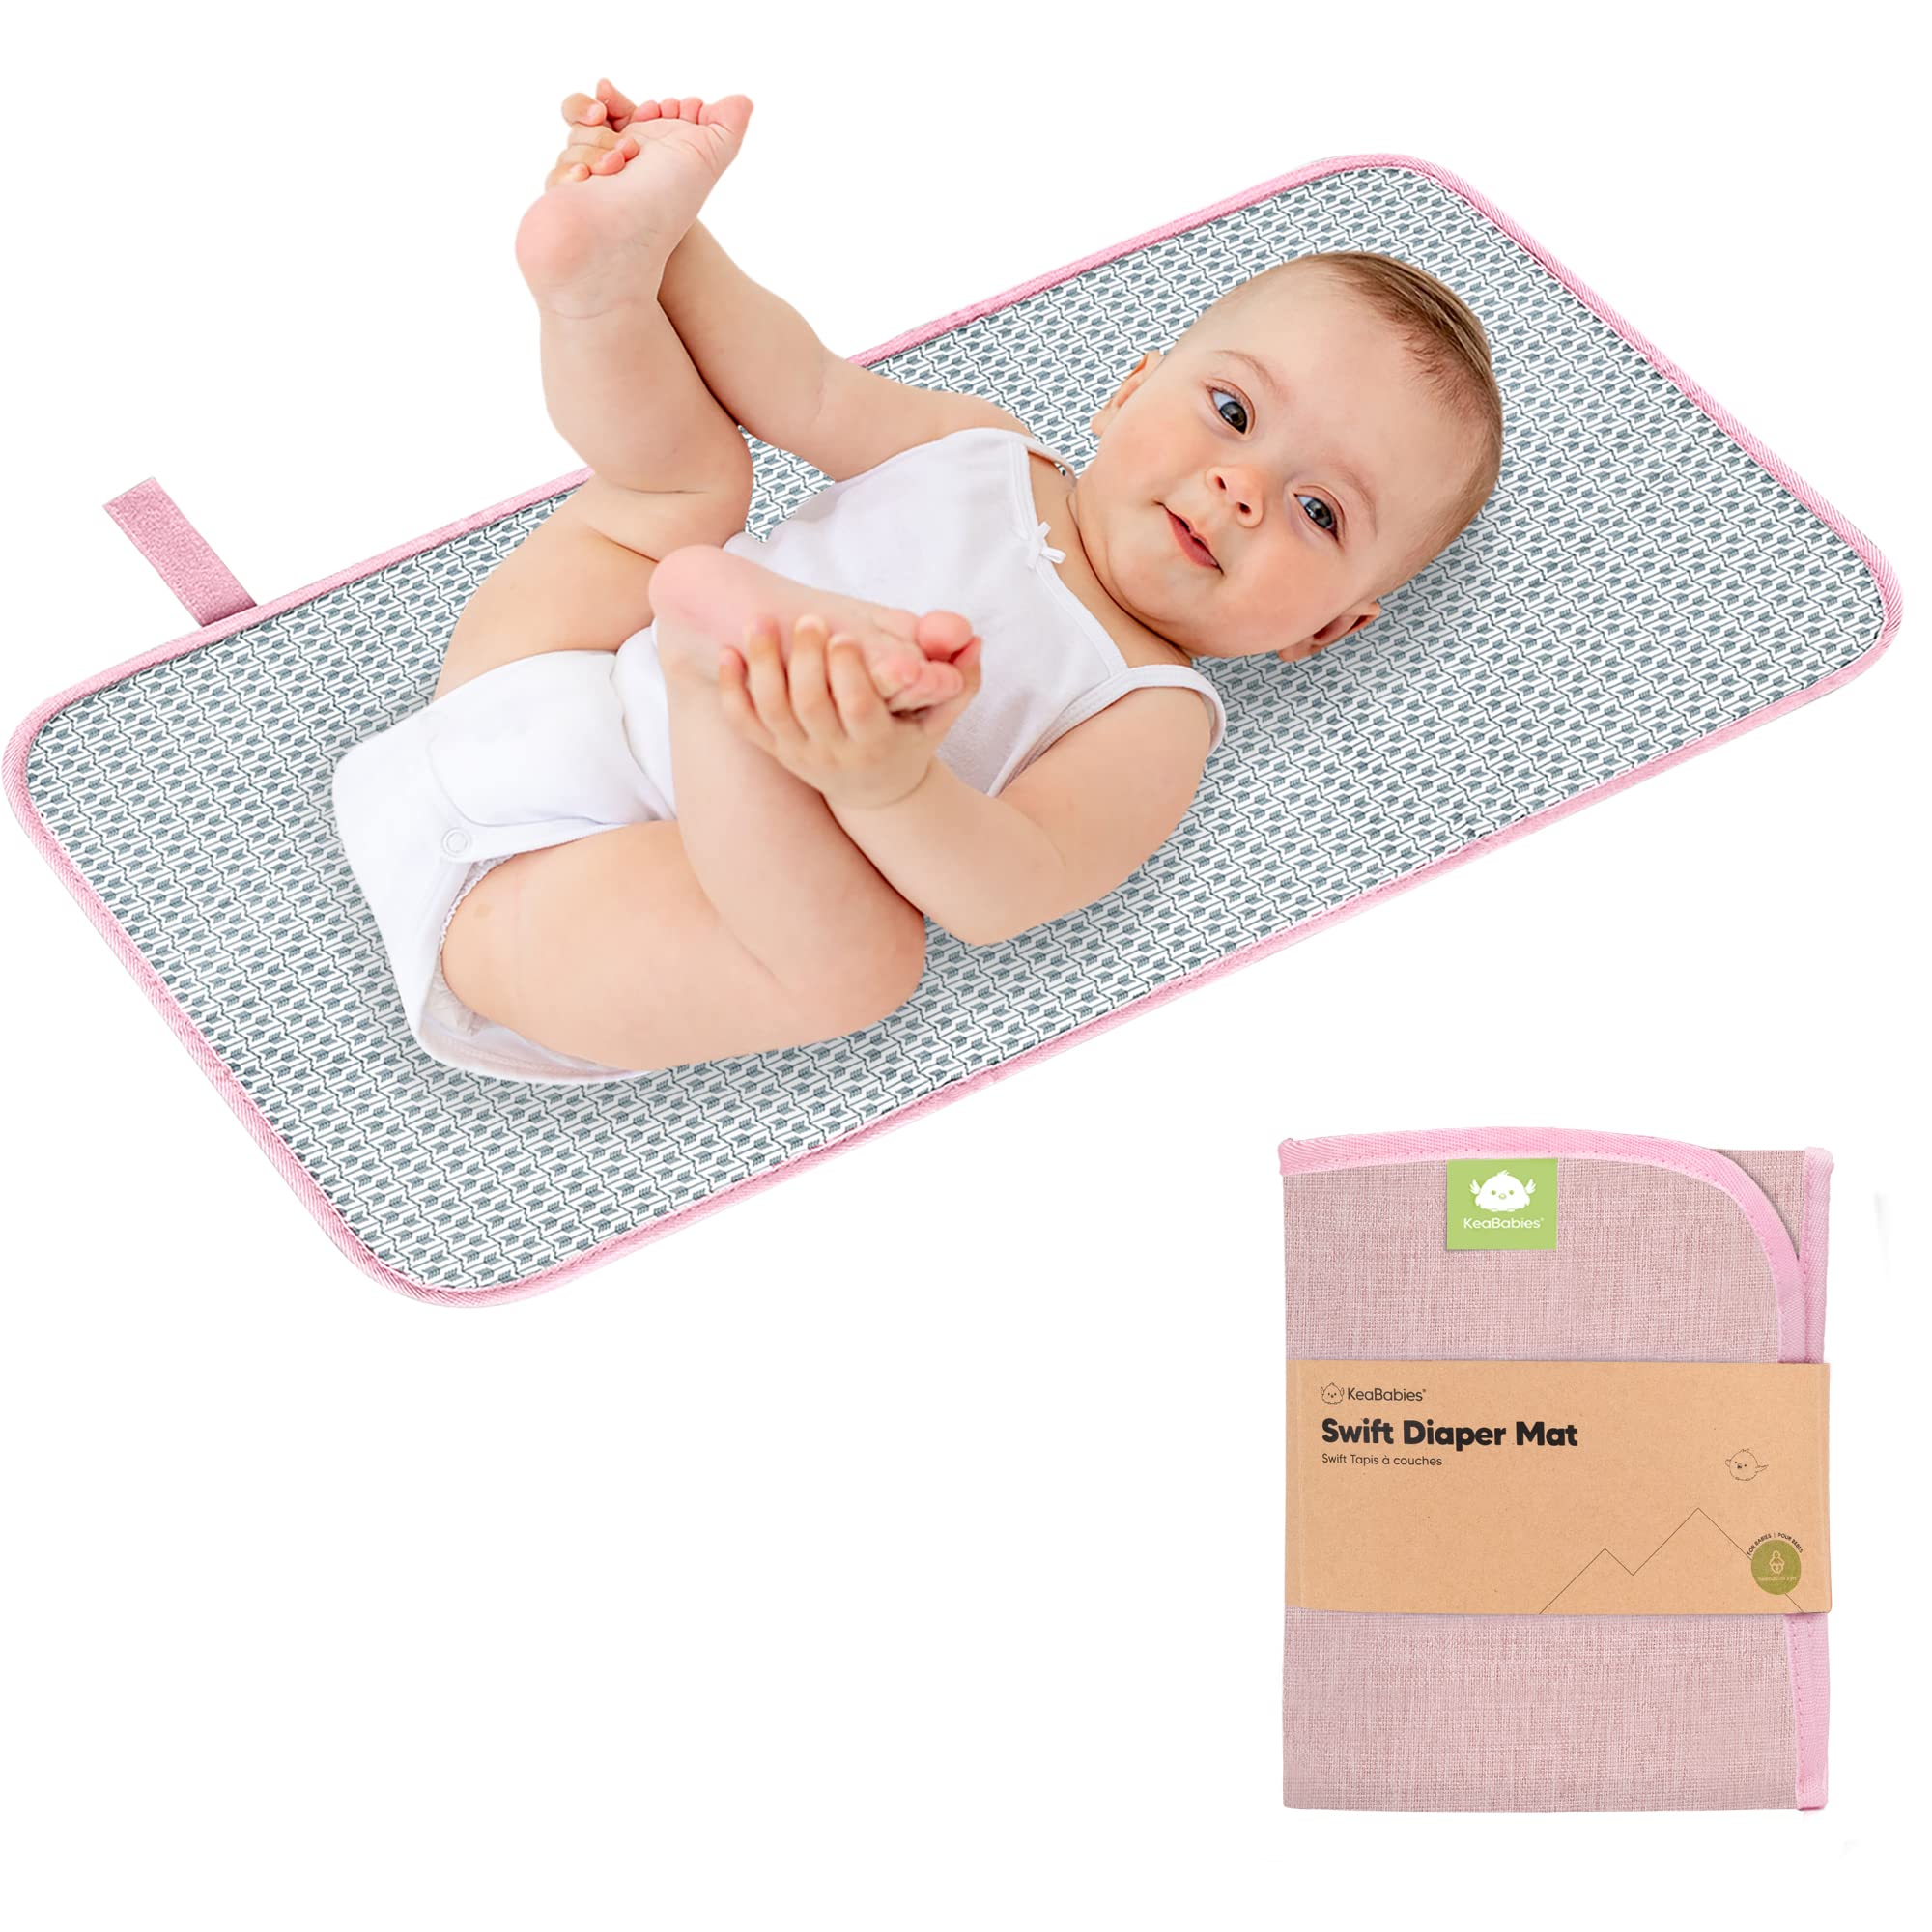 KeaBabies Portable Diaper changing Pad - Waterproof Foldable Baby changing Mat - Travel Diaper change Mat - Lightweight changing Pads for